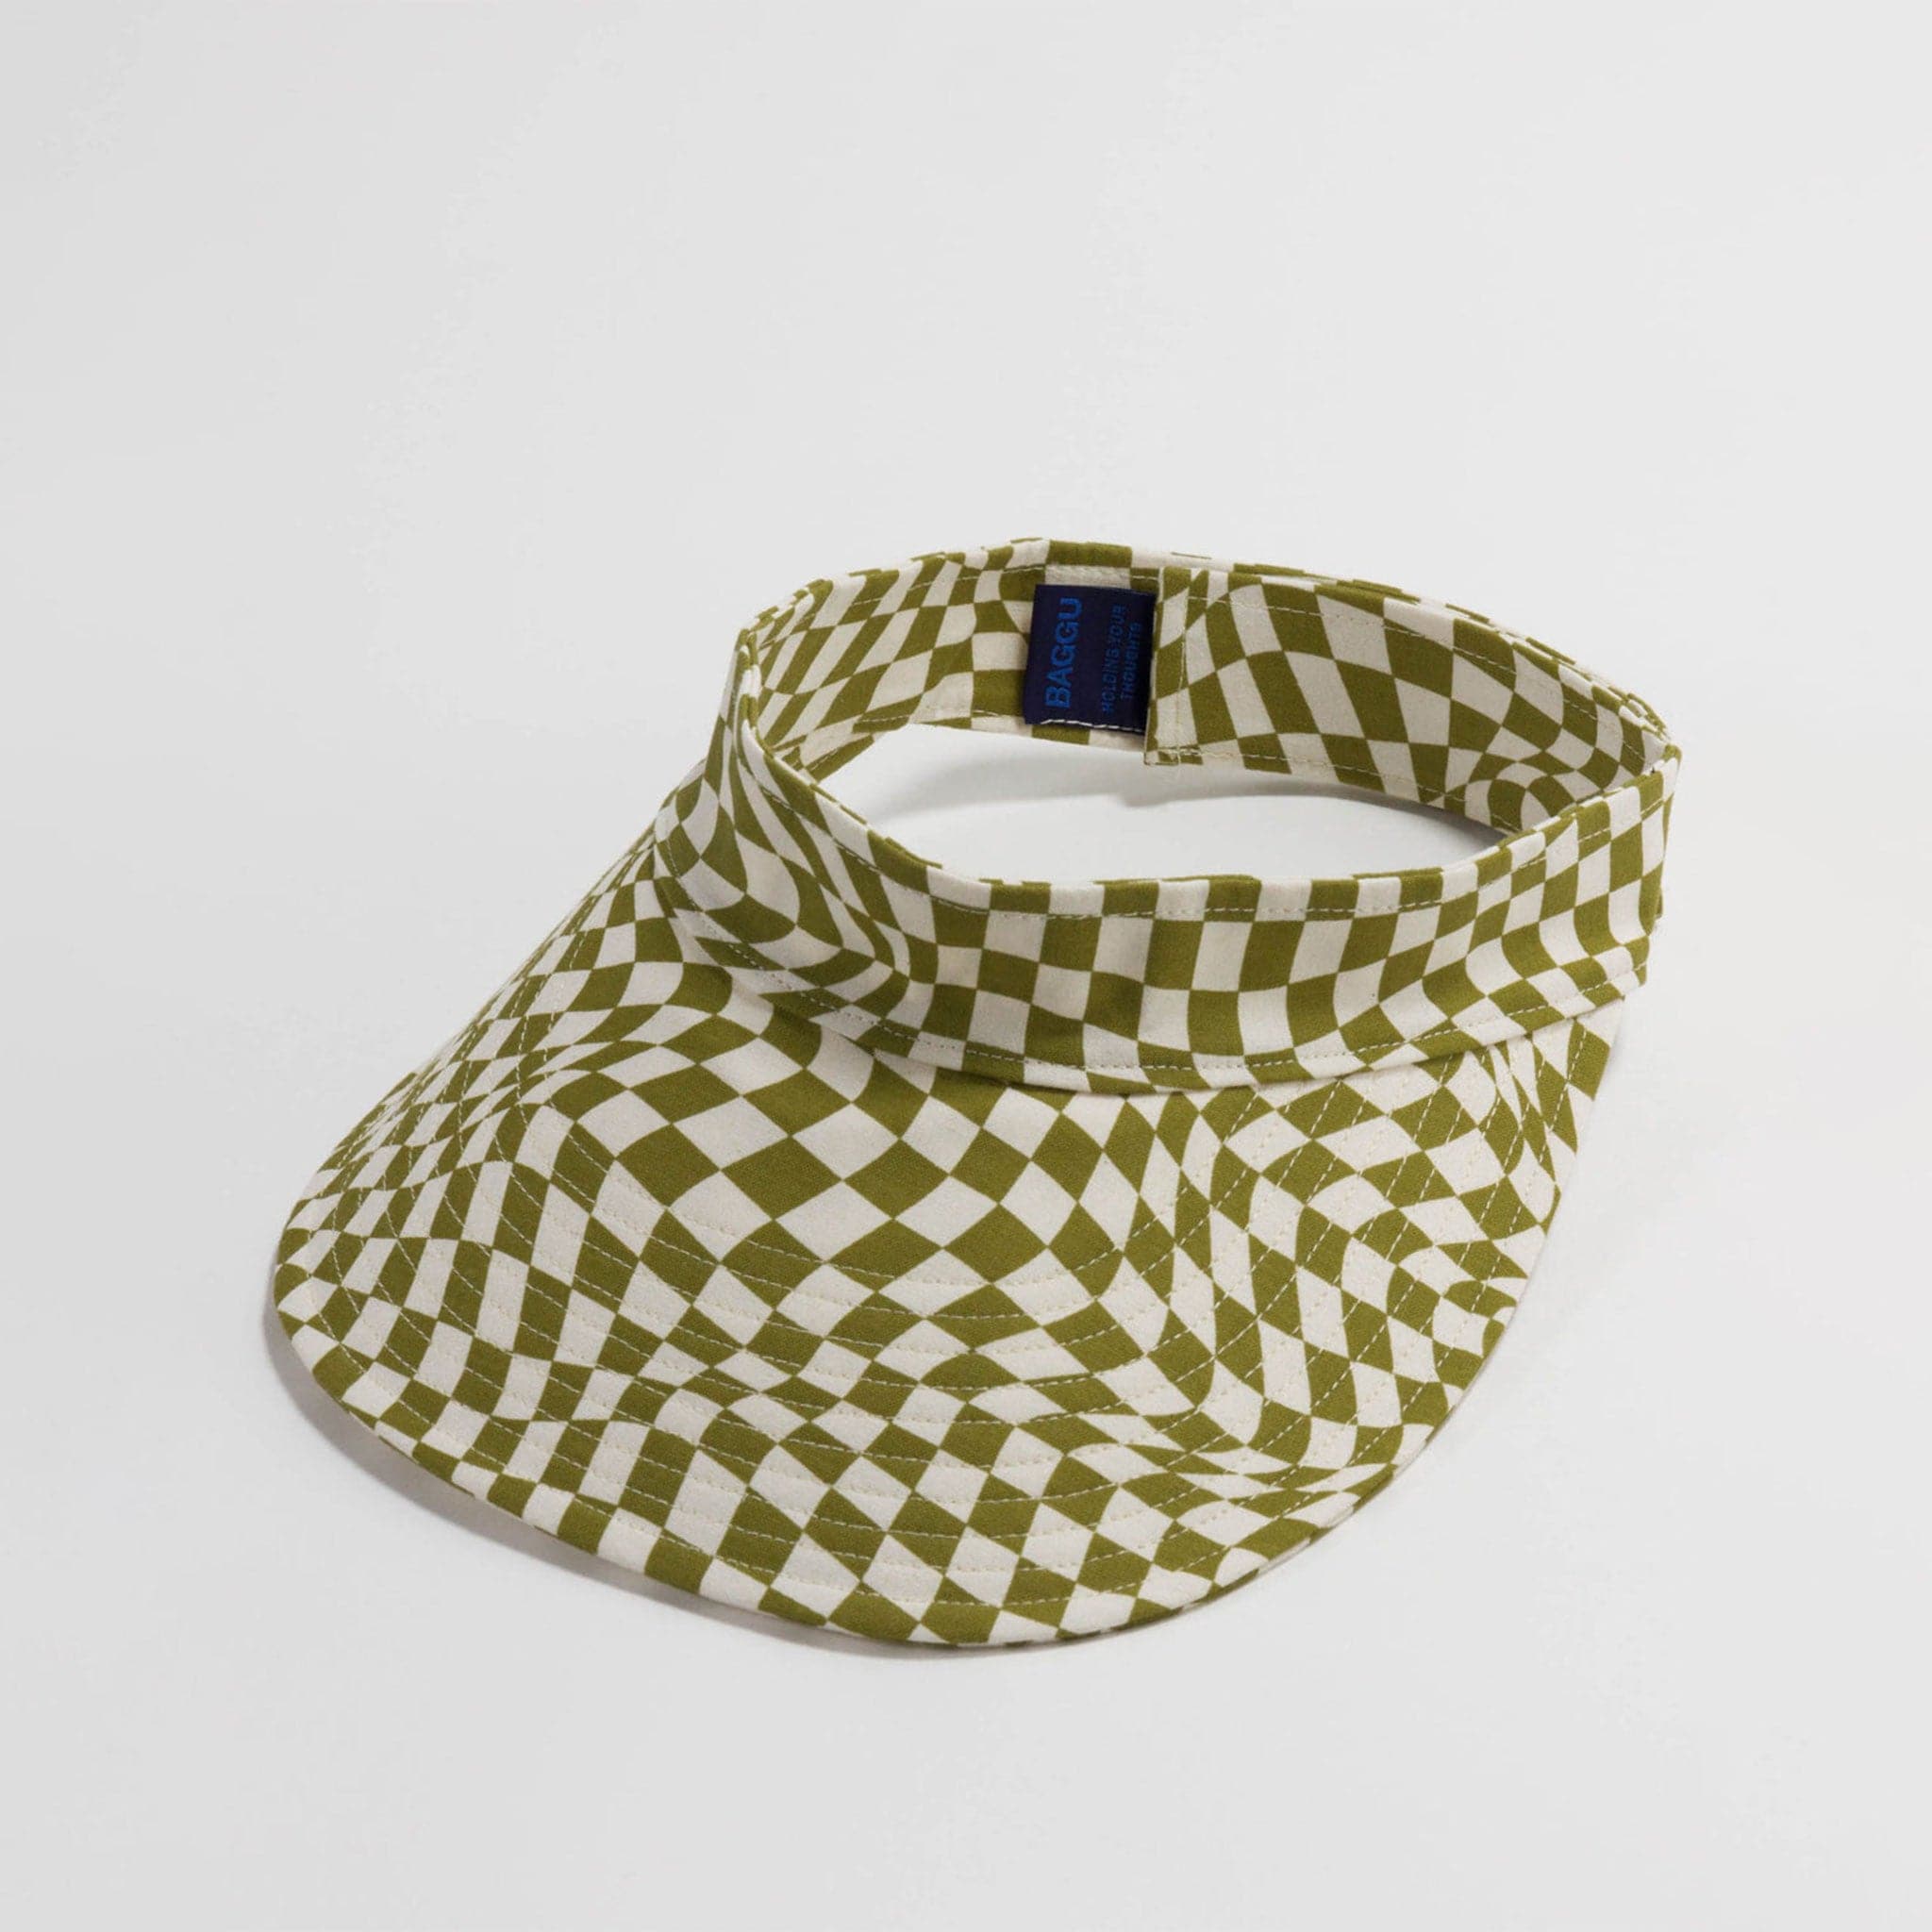 A visor with green and white wavy checkers.